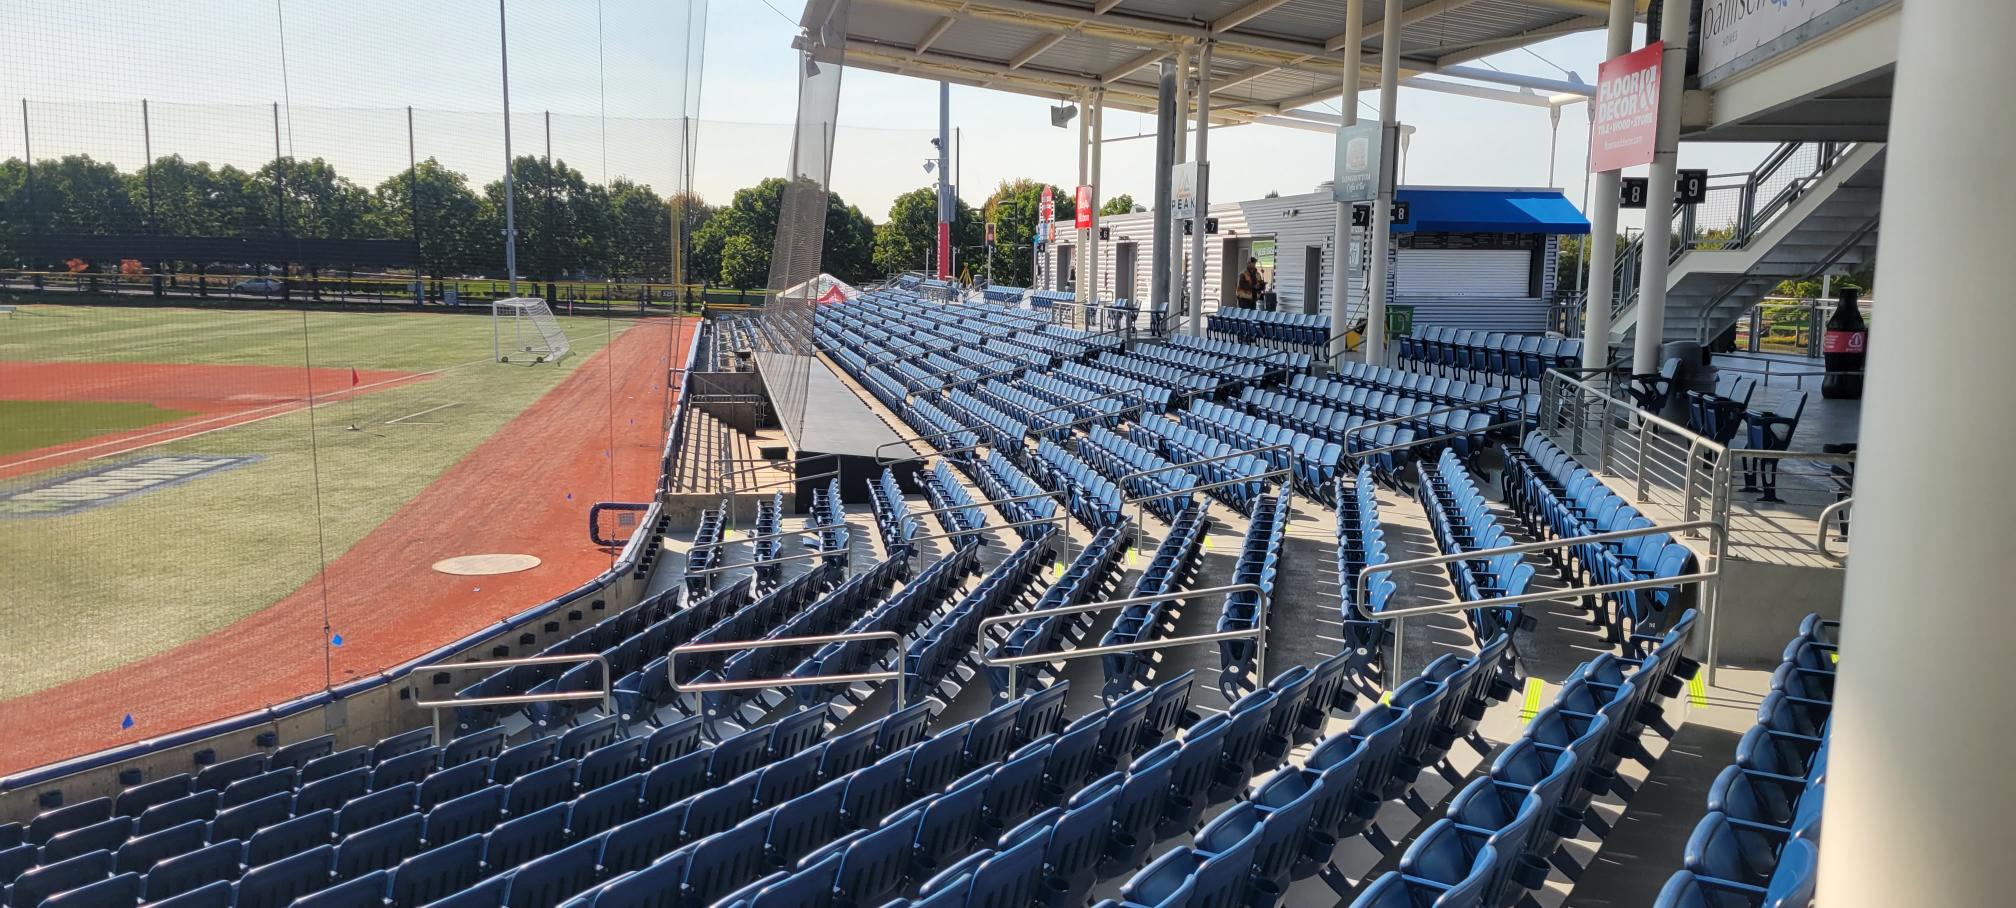 Rows of stadium seating and a ball field at the Hillsboro Hops Stadium